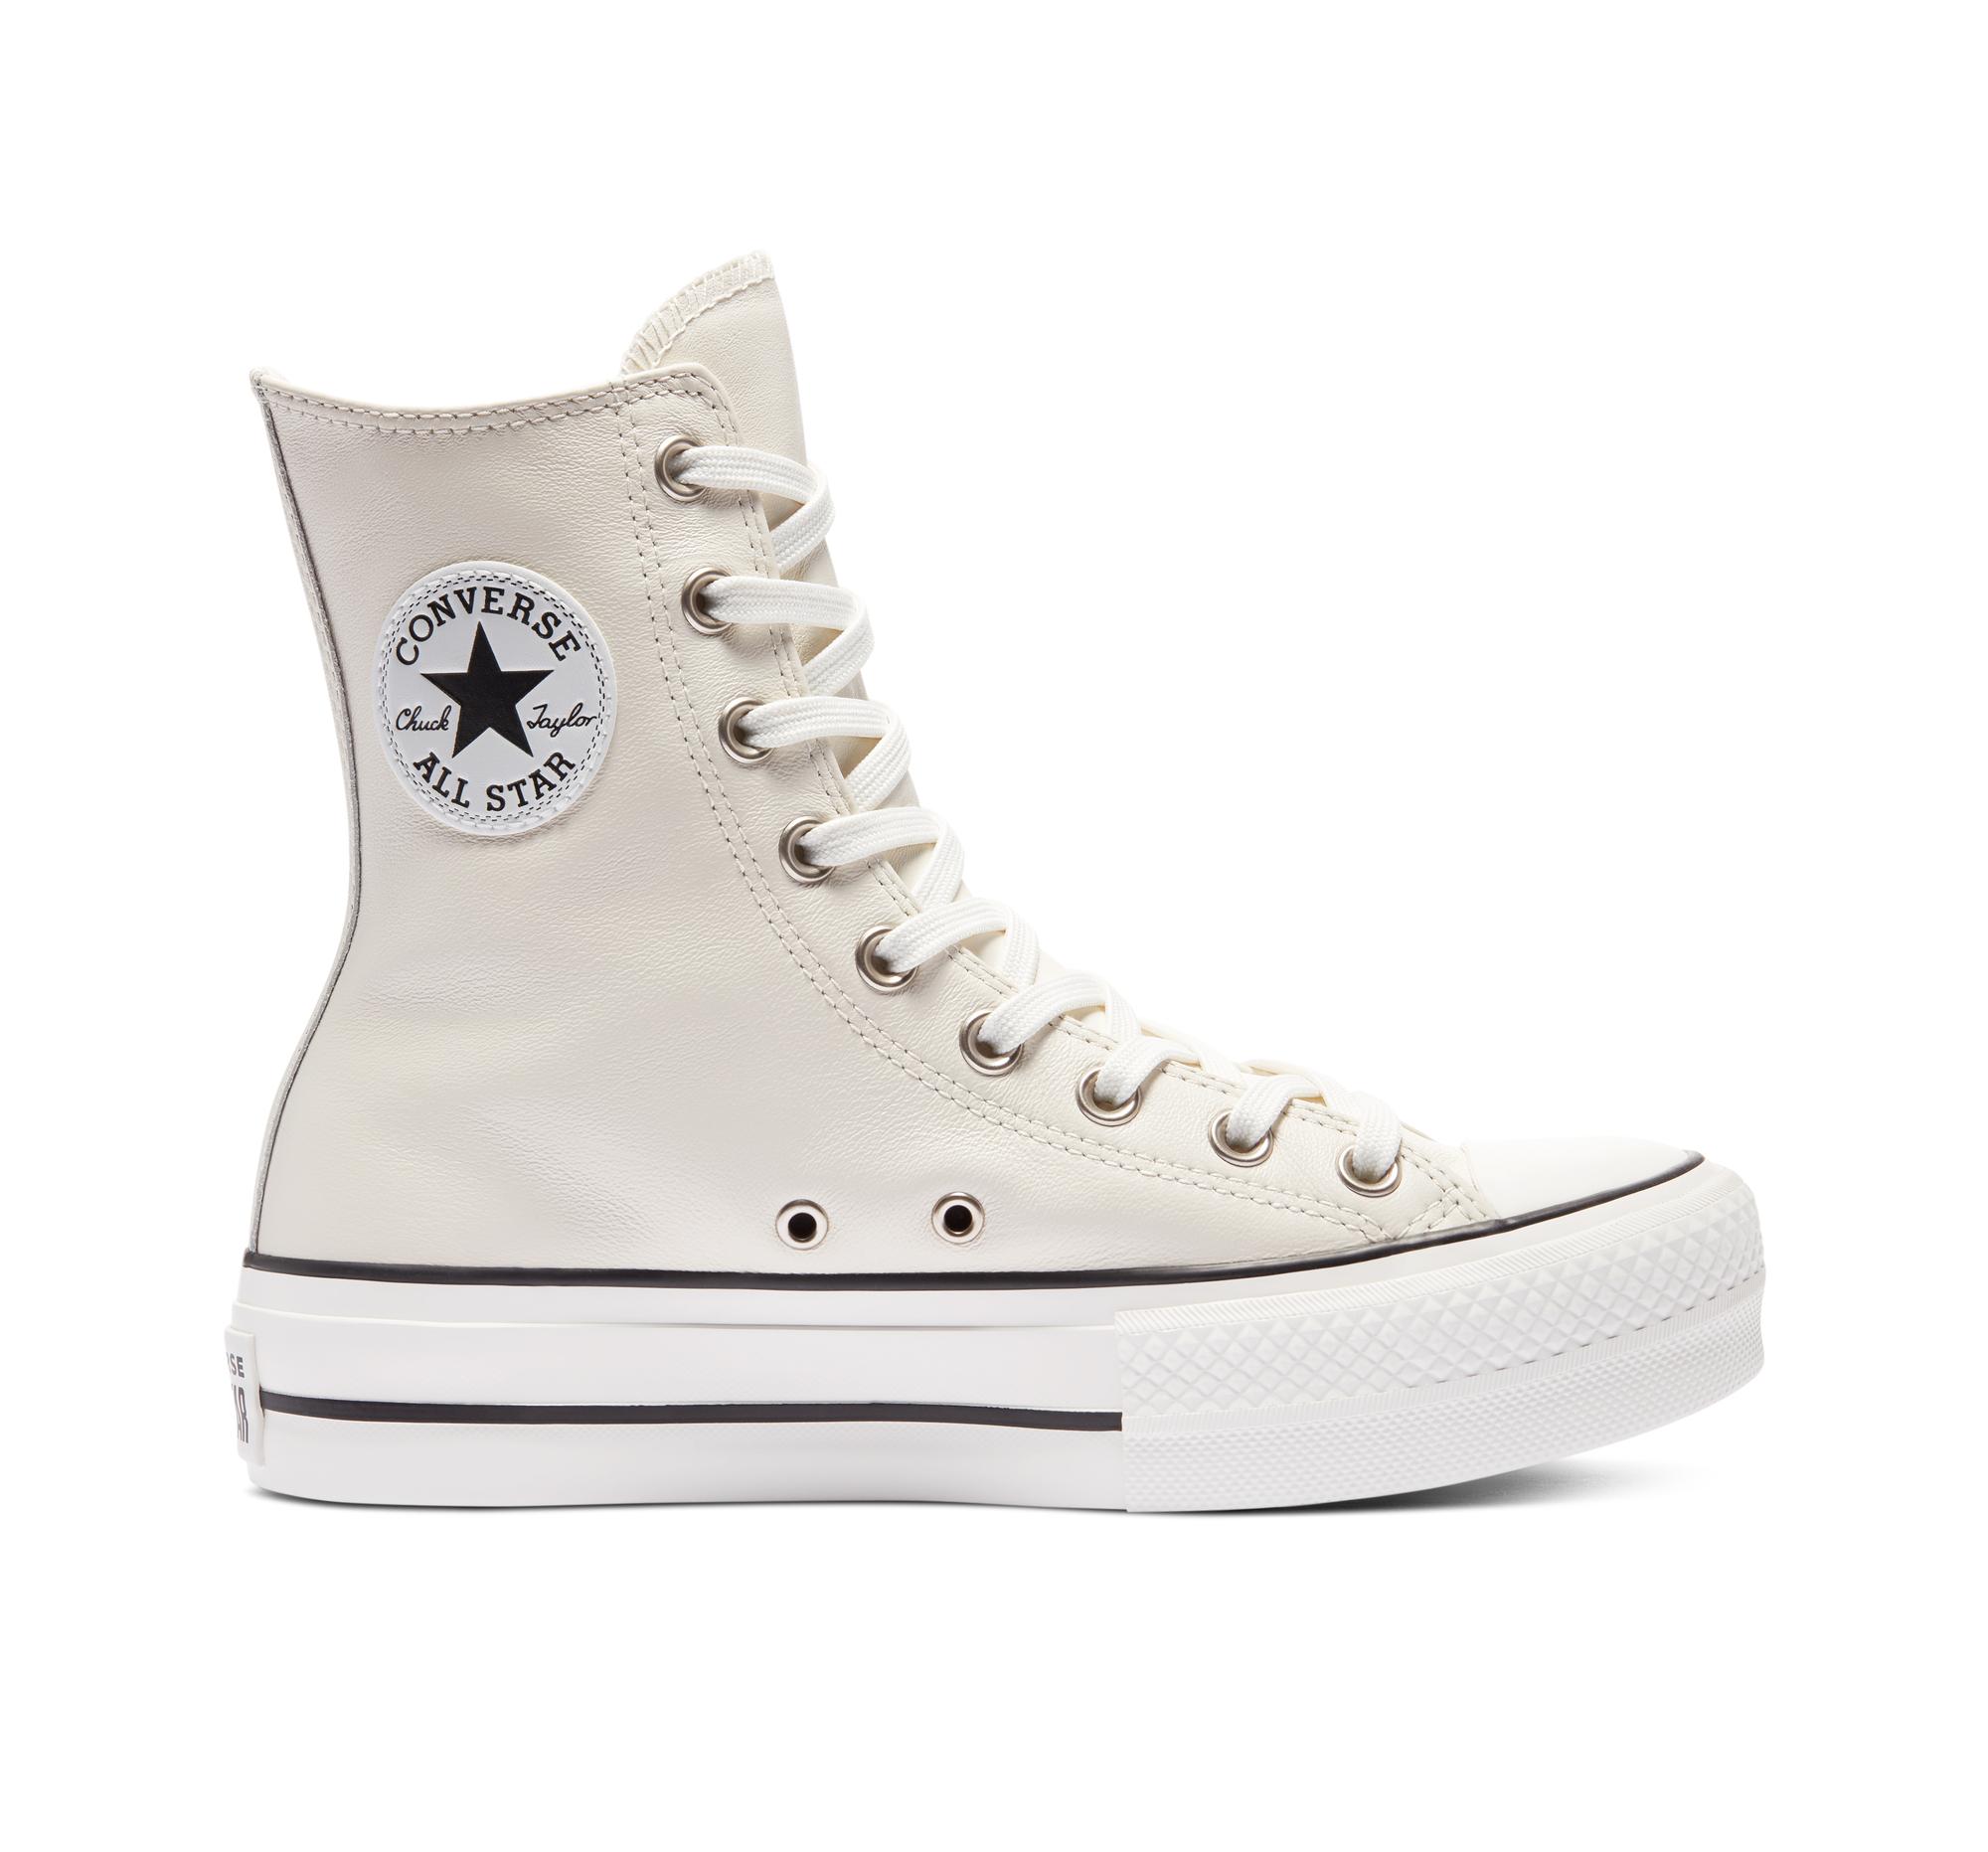 Converse Extra High Platform Chuck Taylor All Star in White | Lyst حبيبات داوني